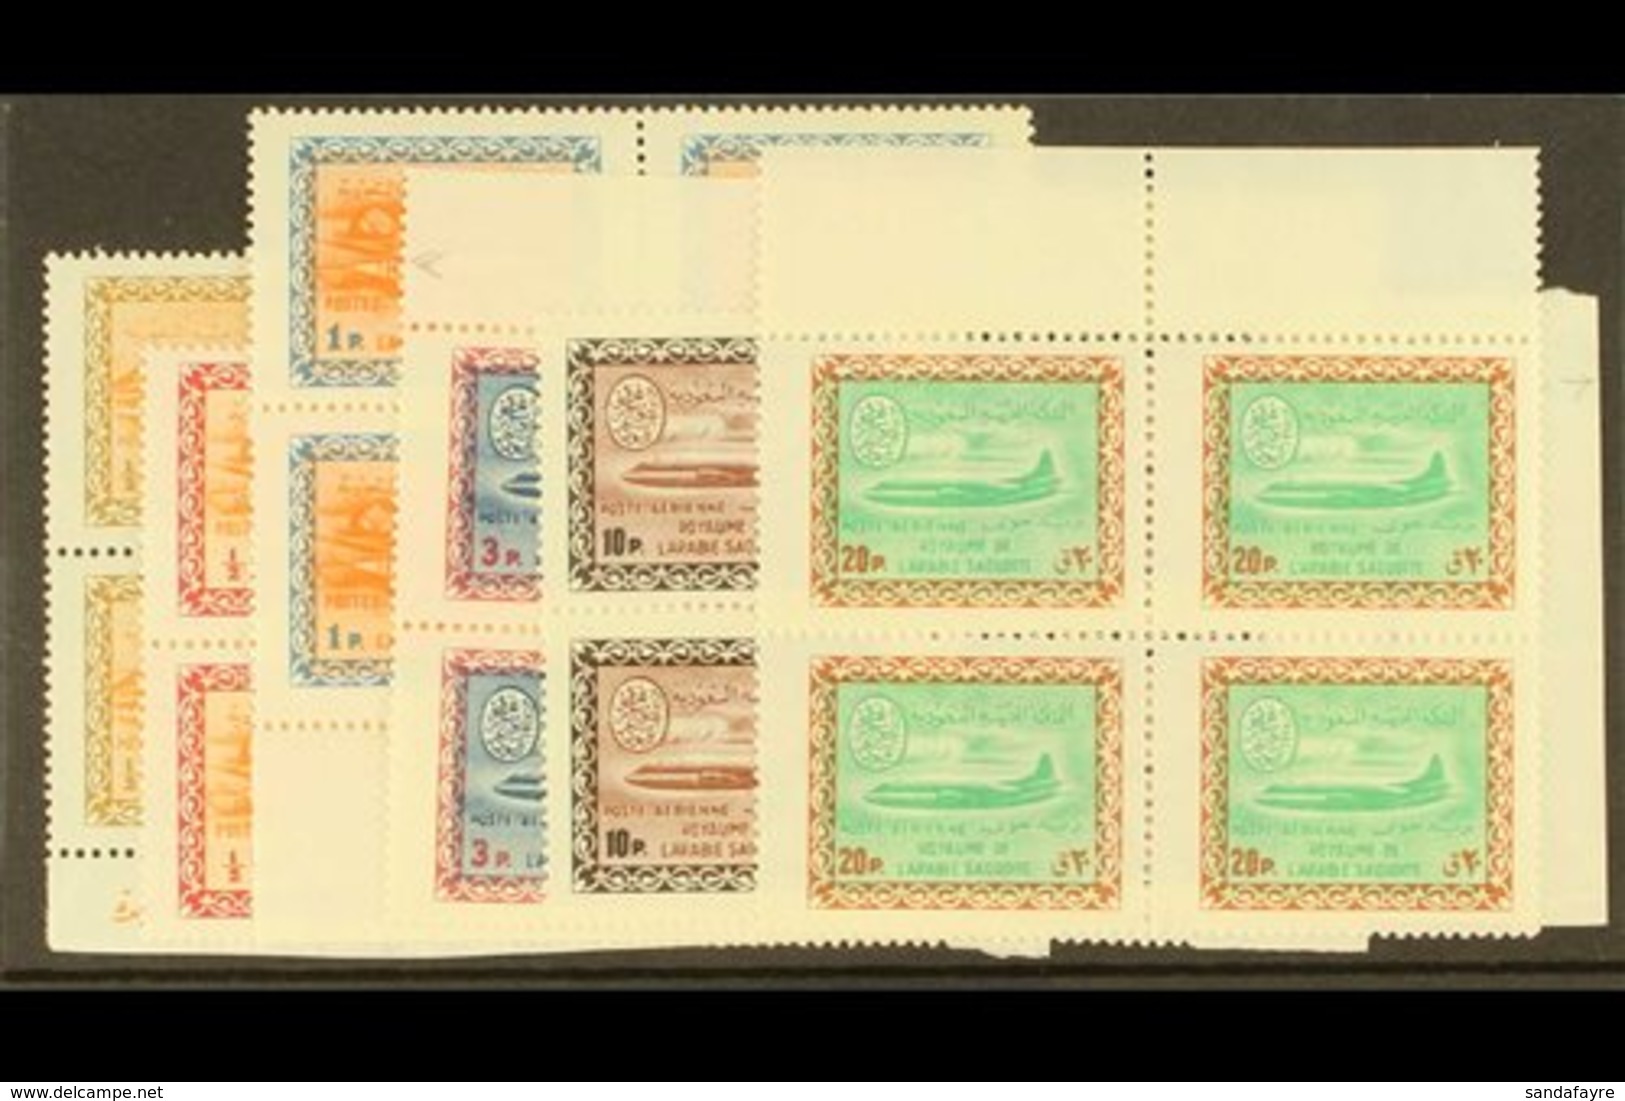 \Y 1963 - 4\Y Stamps Of 1960-1, Redrawn In Larger Format ½p To 20p, SG 487/92, In Superb Never Hinged Mint Marginal Bloc - Saudi Arabia